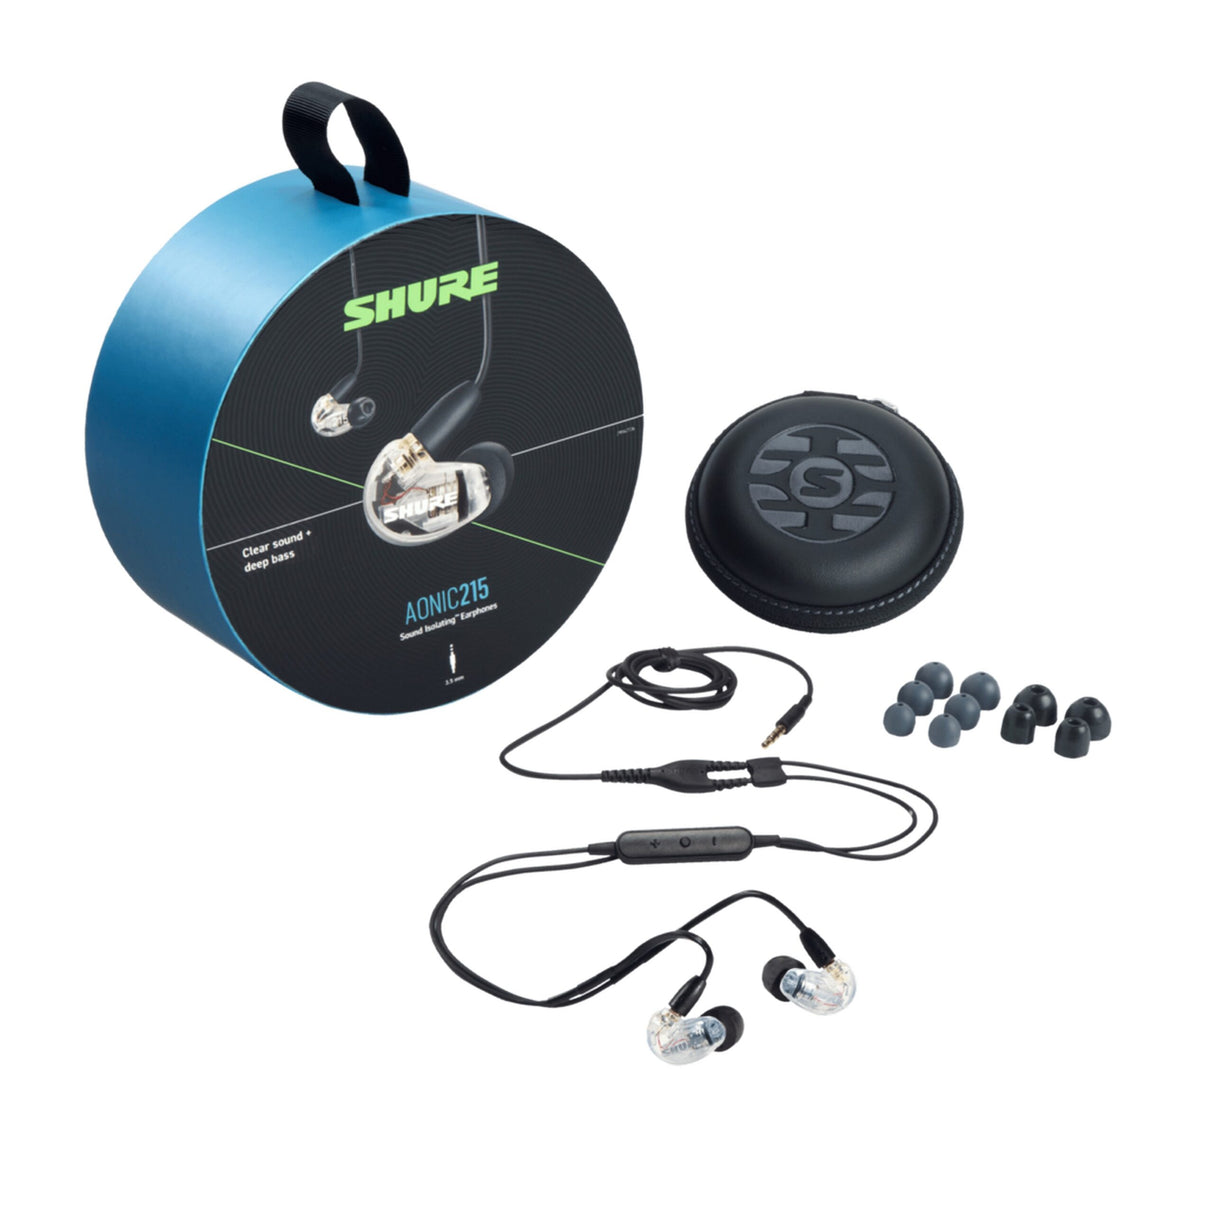 Shure AONIC 215 SE215DYCL+UNI Wired Sound Isolating In-Ear Headphone, Clear